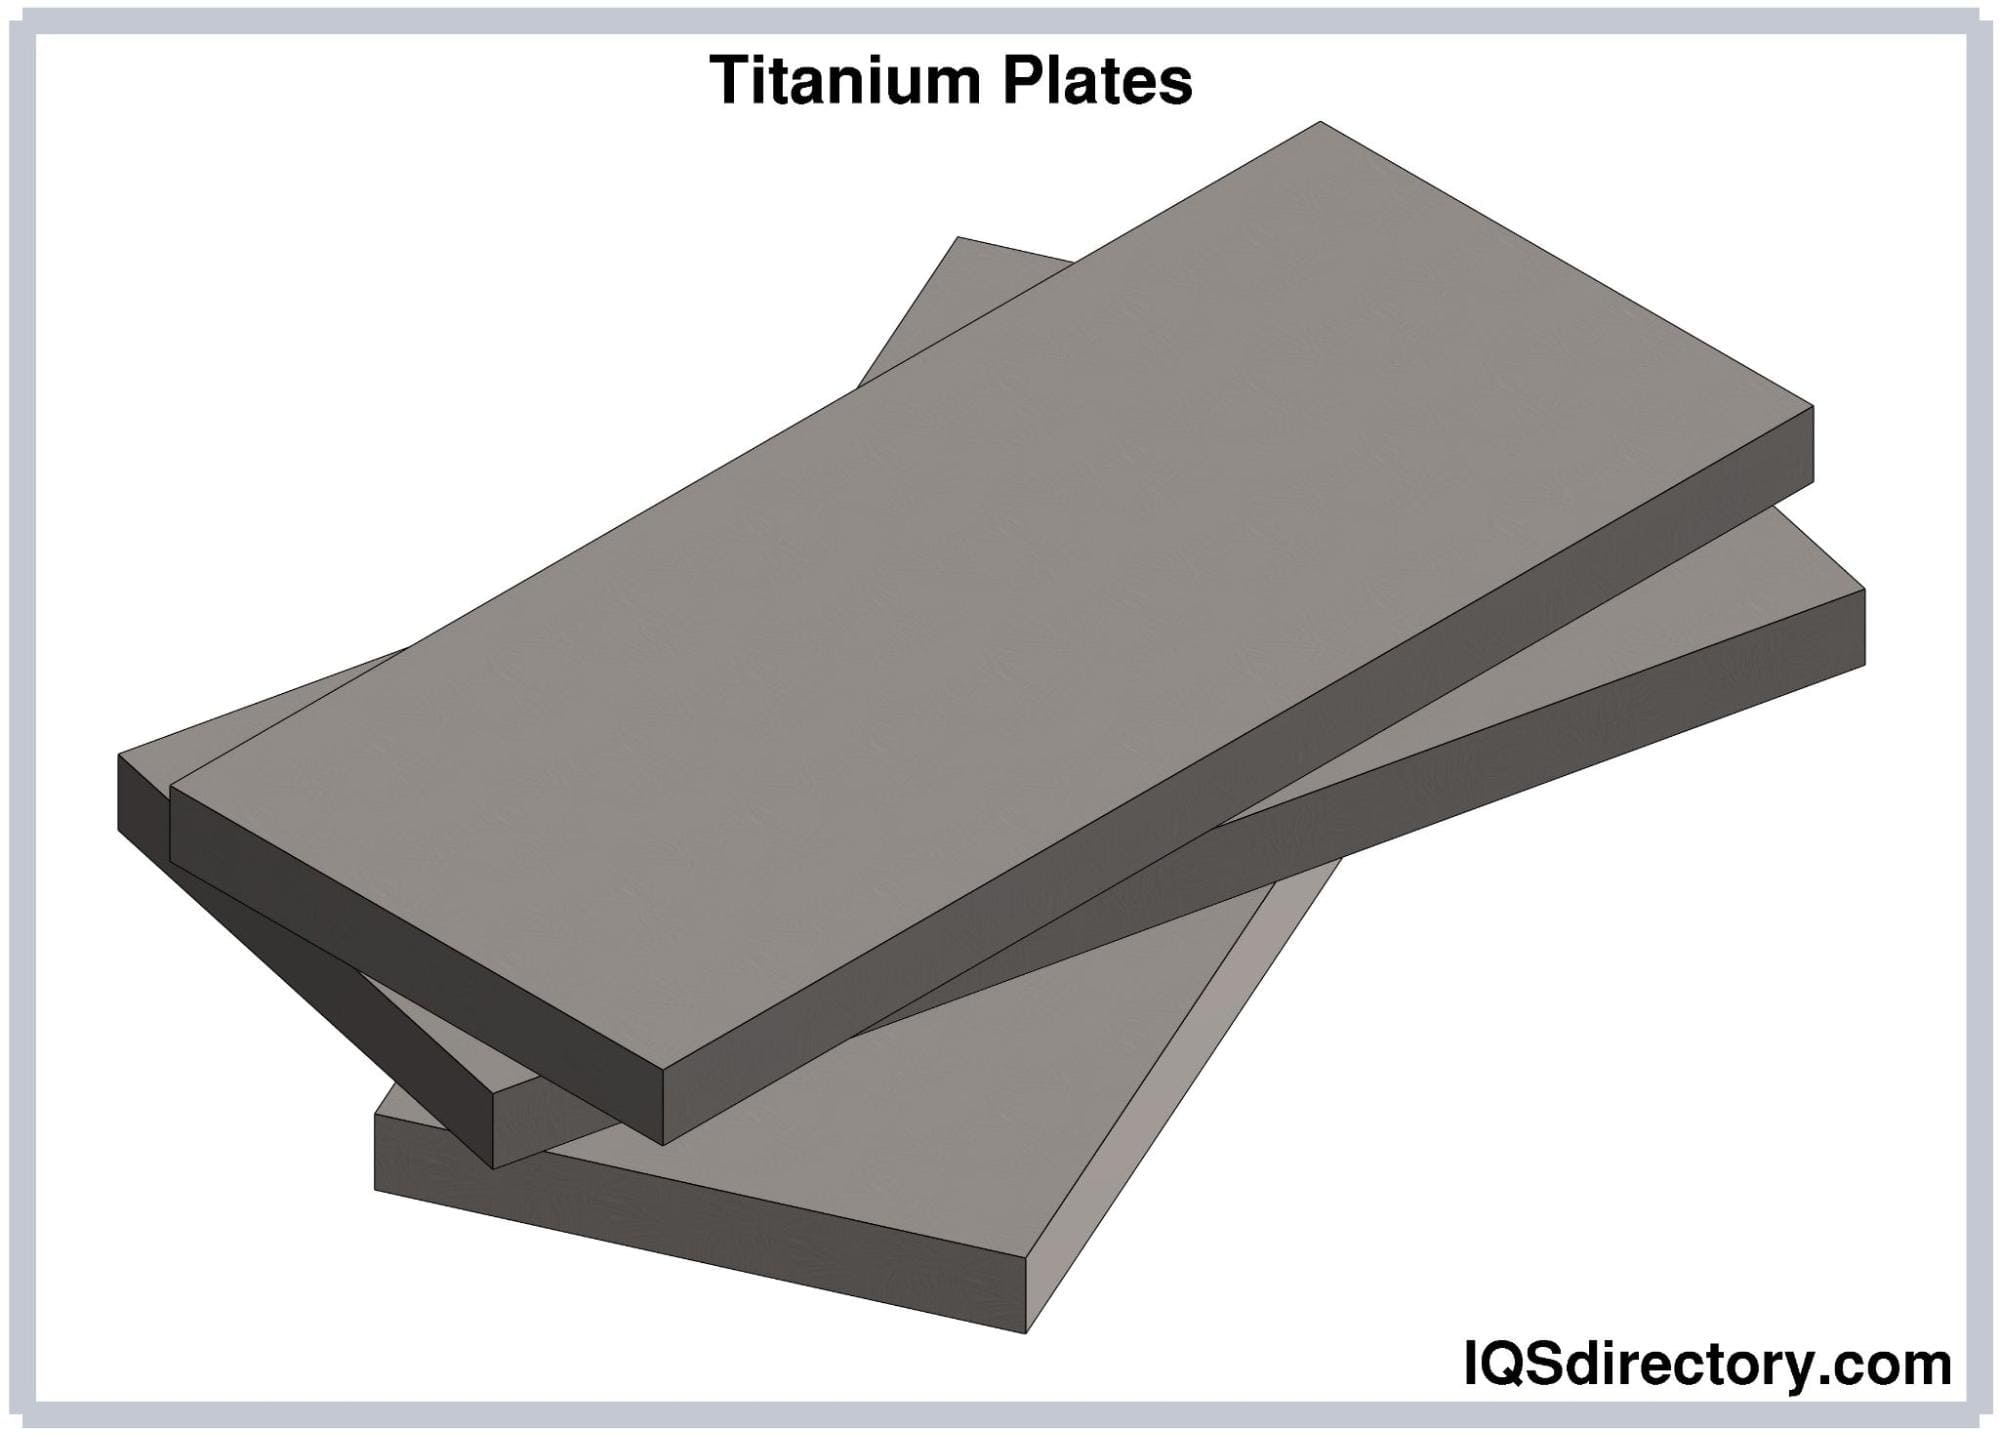 What is Tin Plating? - Aerospace Metals